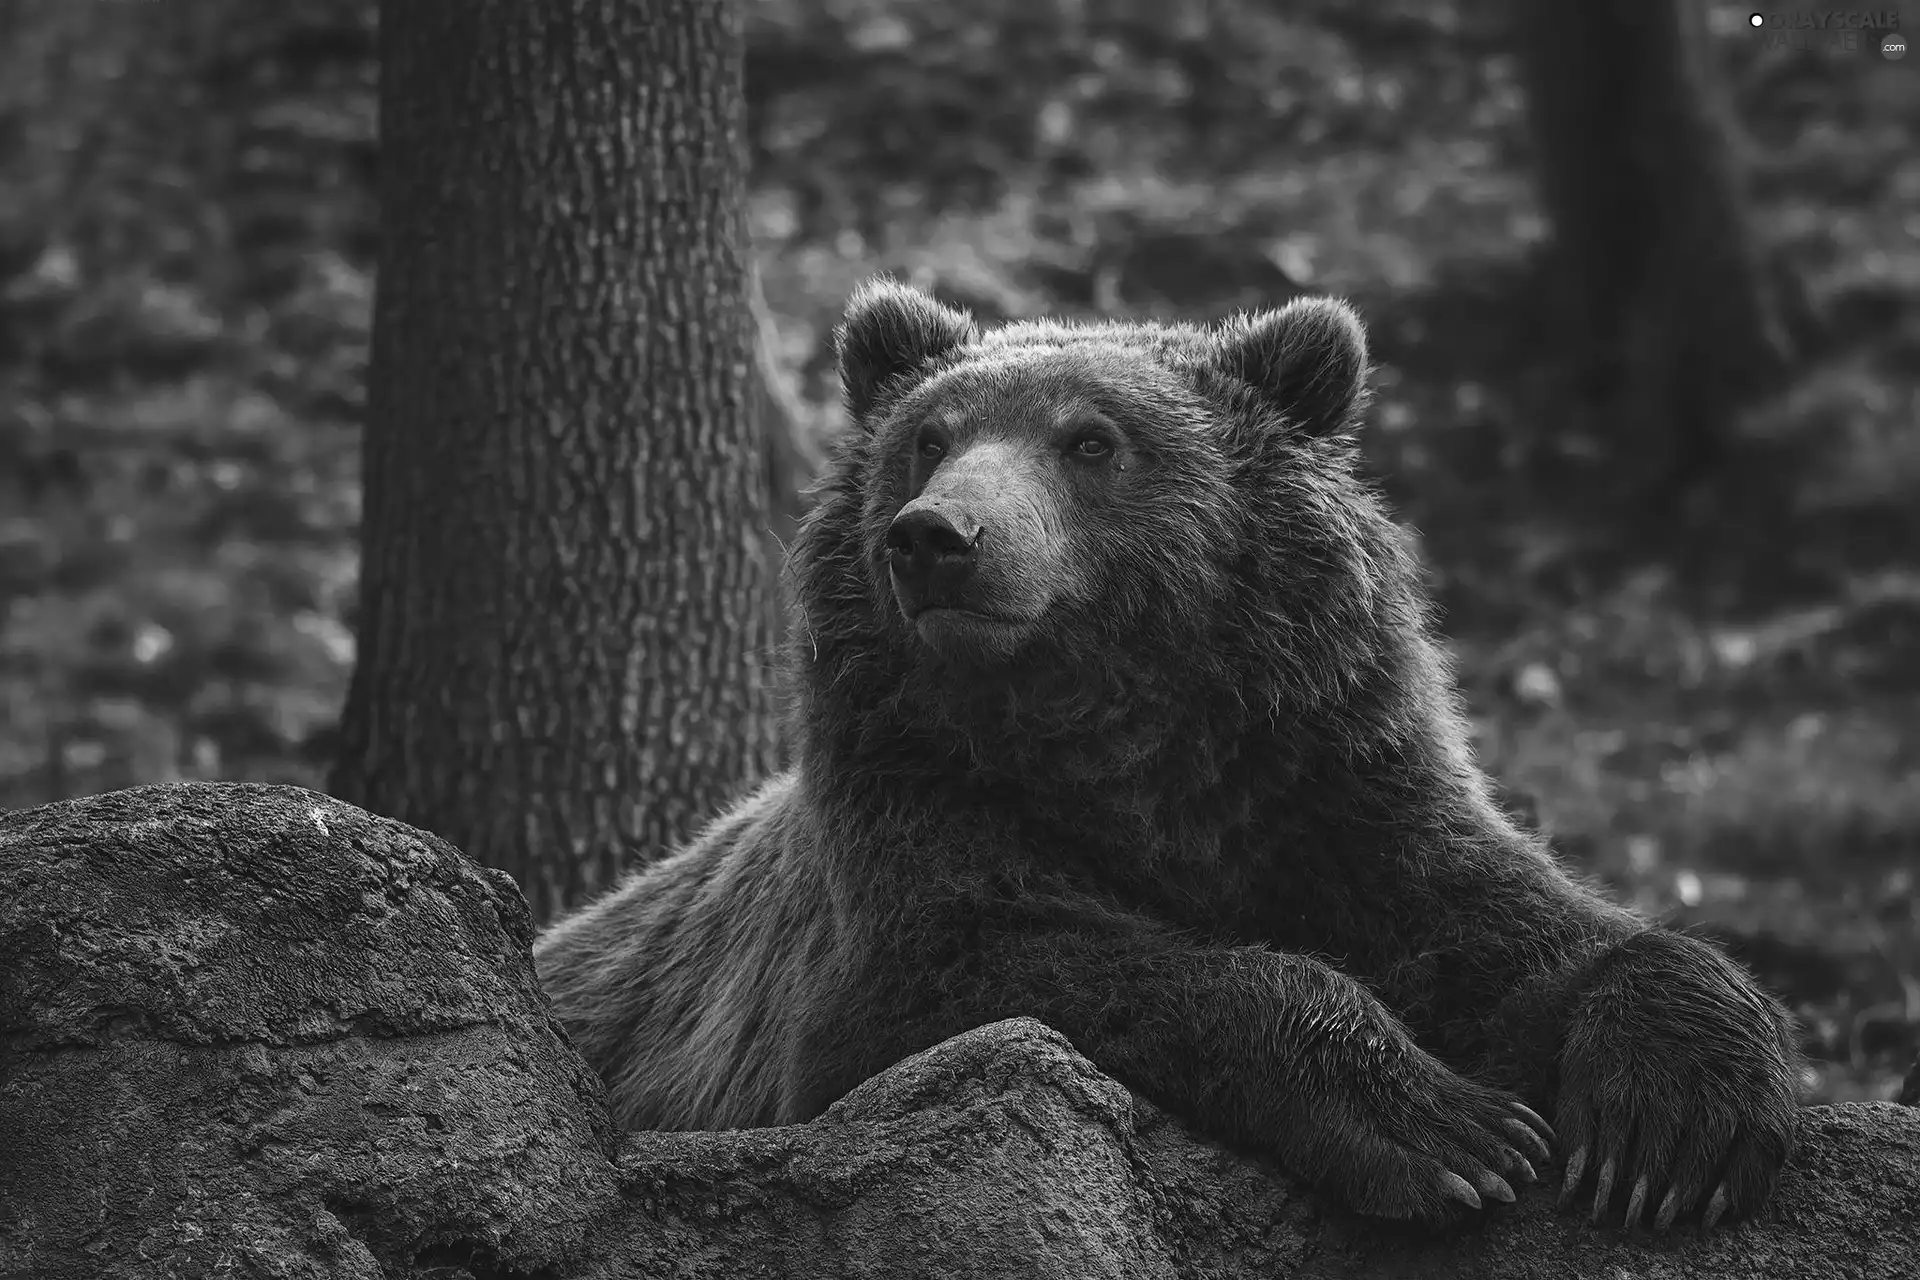 Brown bear, Stone, forest, Grizzly